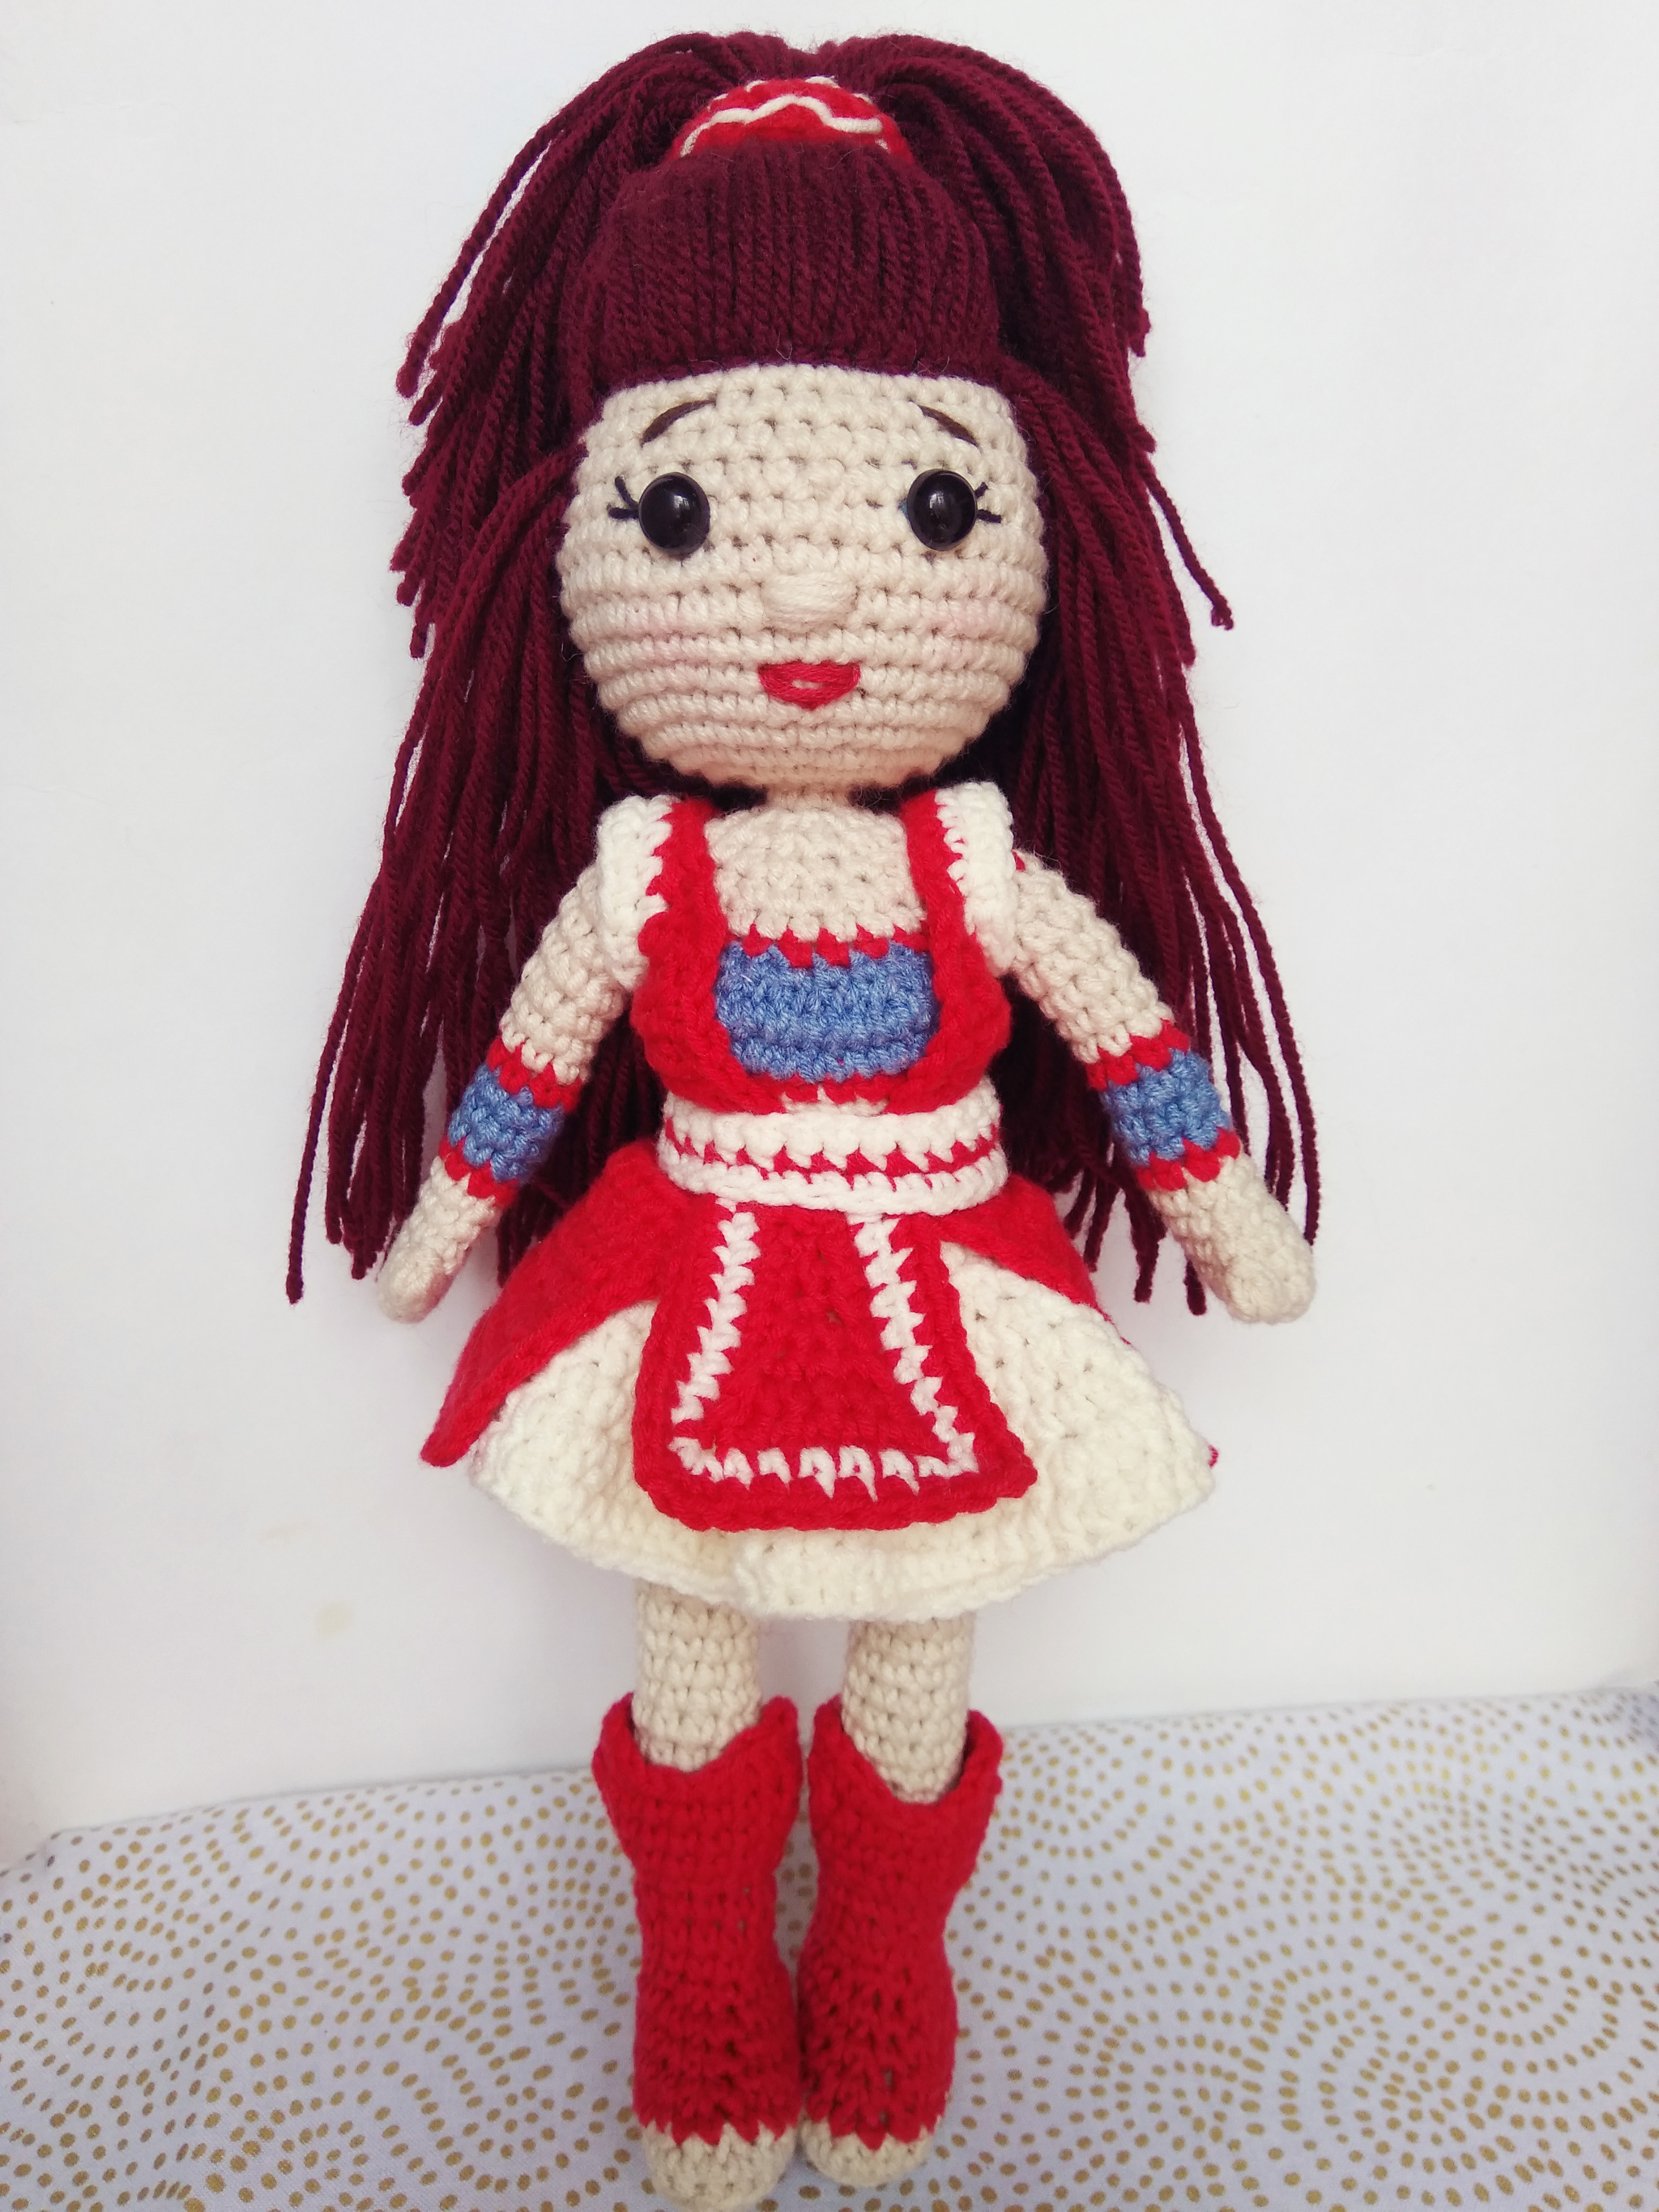 Handmade knitted toys. - My, Needlework, Needlework without process, Knitting, Crochet, Knitted toys, Handmade, Toys, Longpost